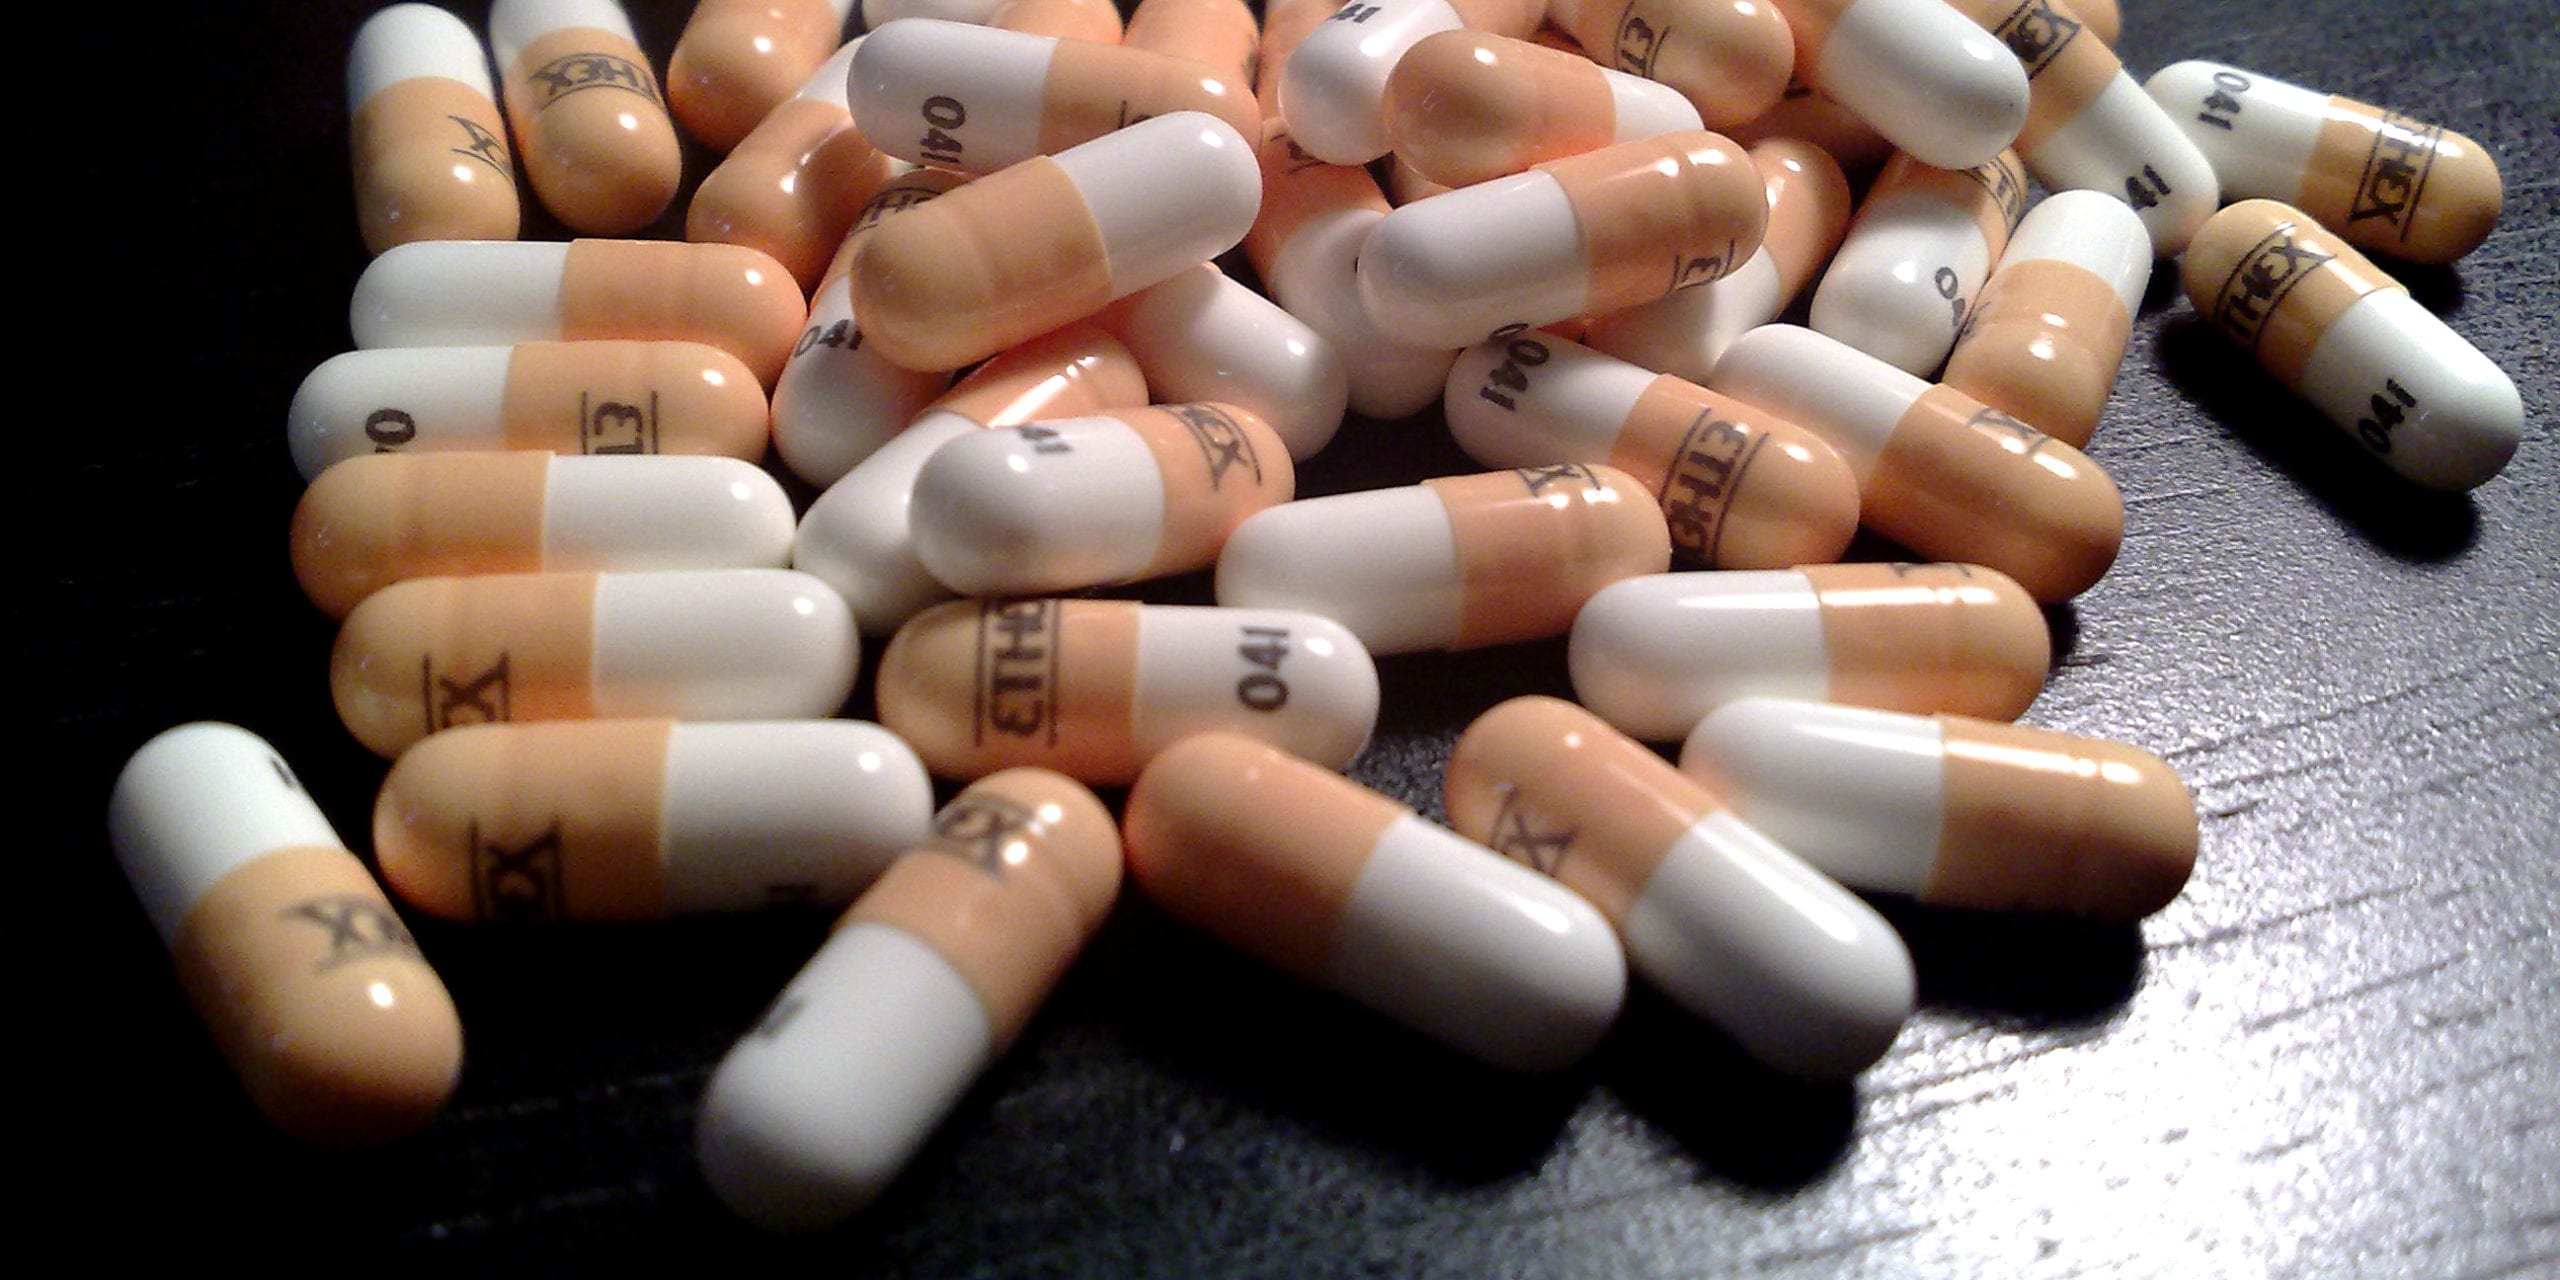 Oxycodone pills, an opioid painkiller. Photo by Flickr user Be.Futureproof.